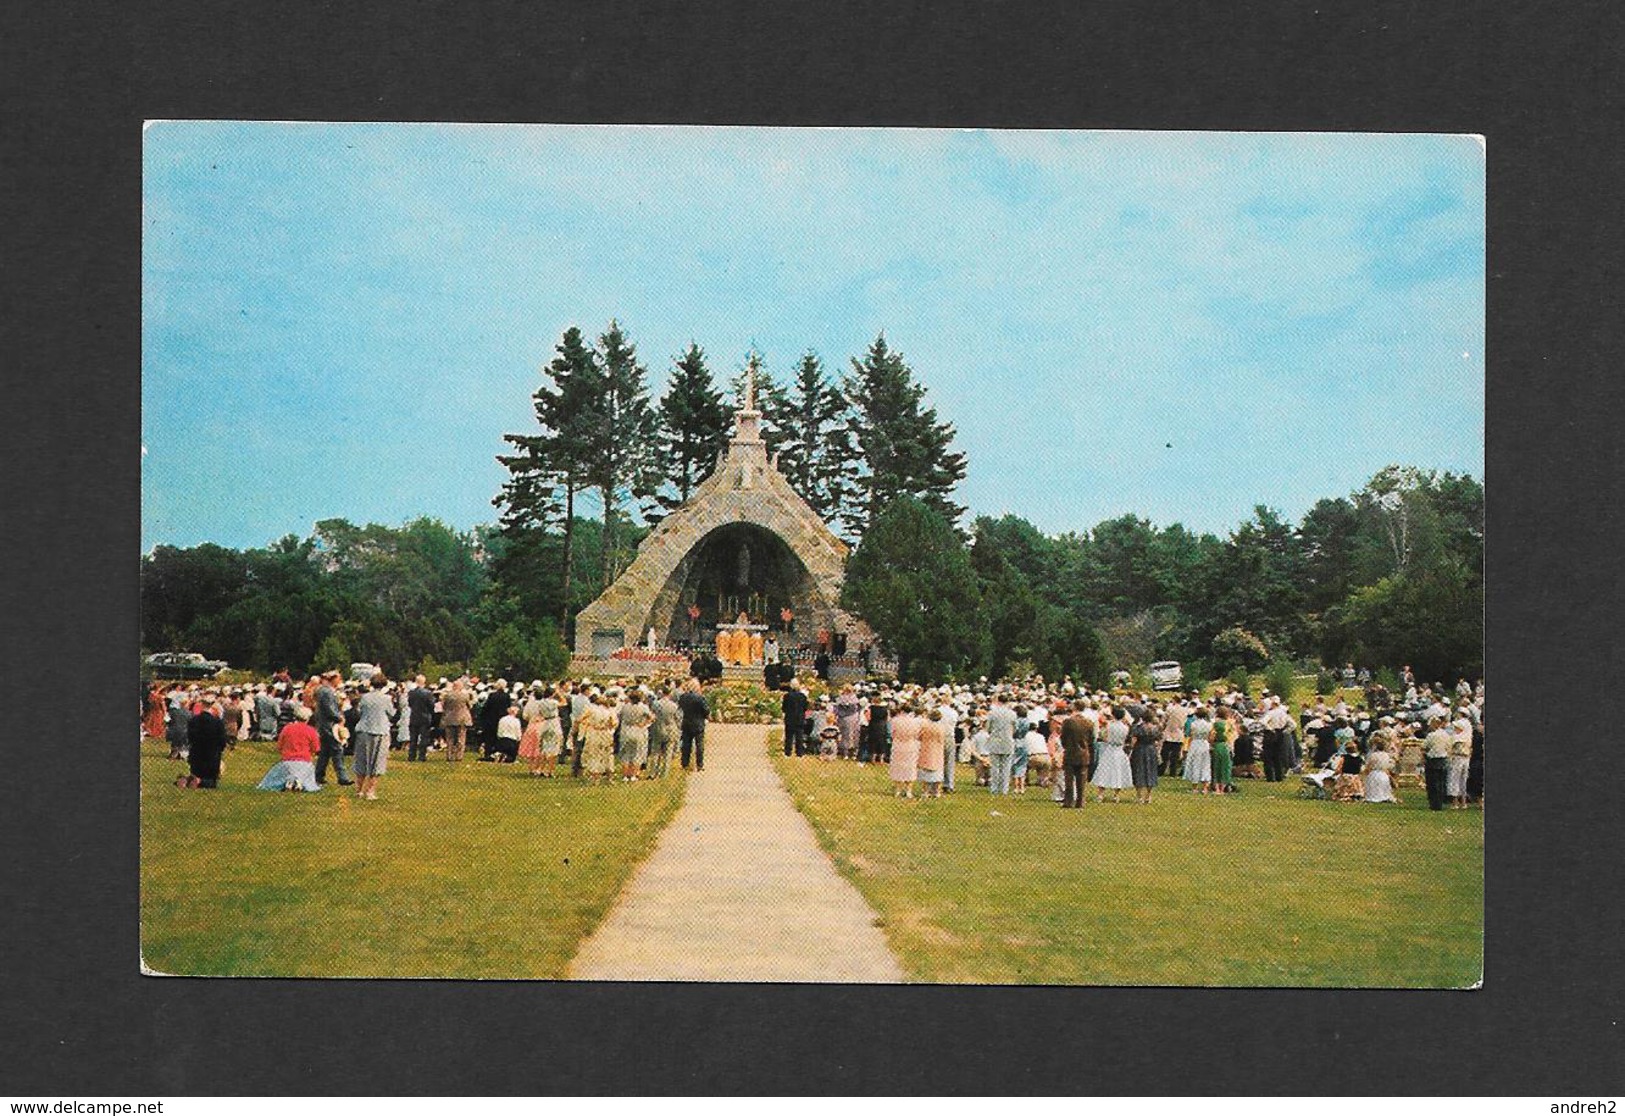 KENNEBUNKPORT - MAINE - SHRINE OF OUR LADY OF LOURDES AT ST. ANTHONY FRANCISCAN MONASTERY - Kennebunkport